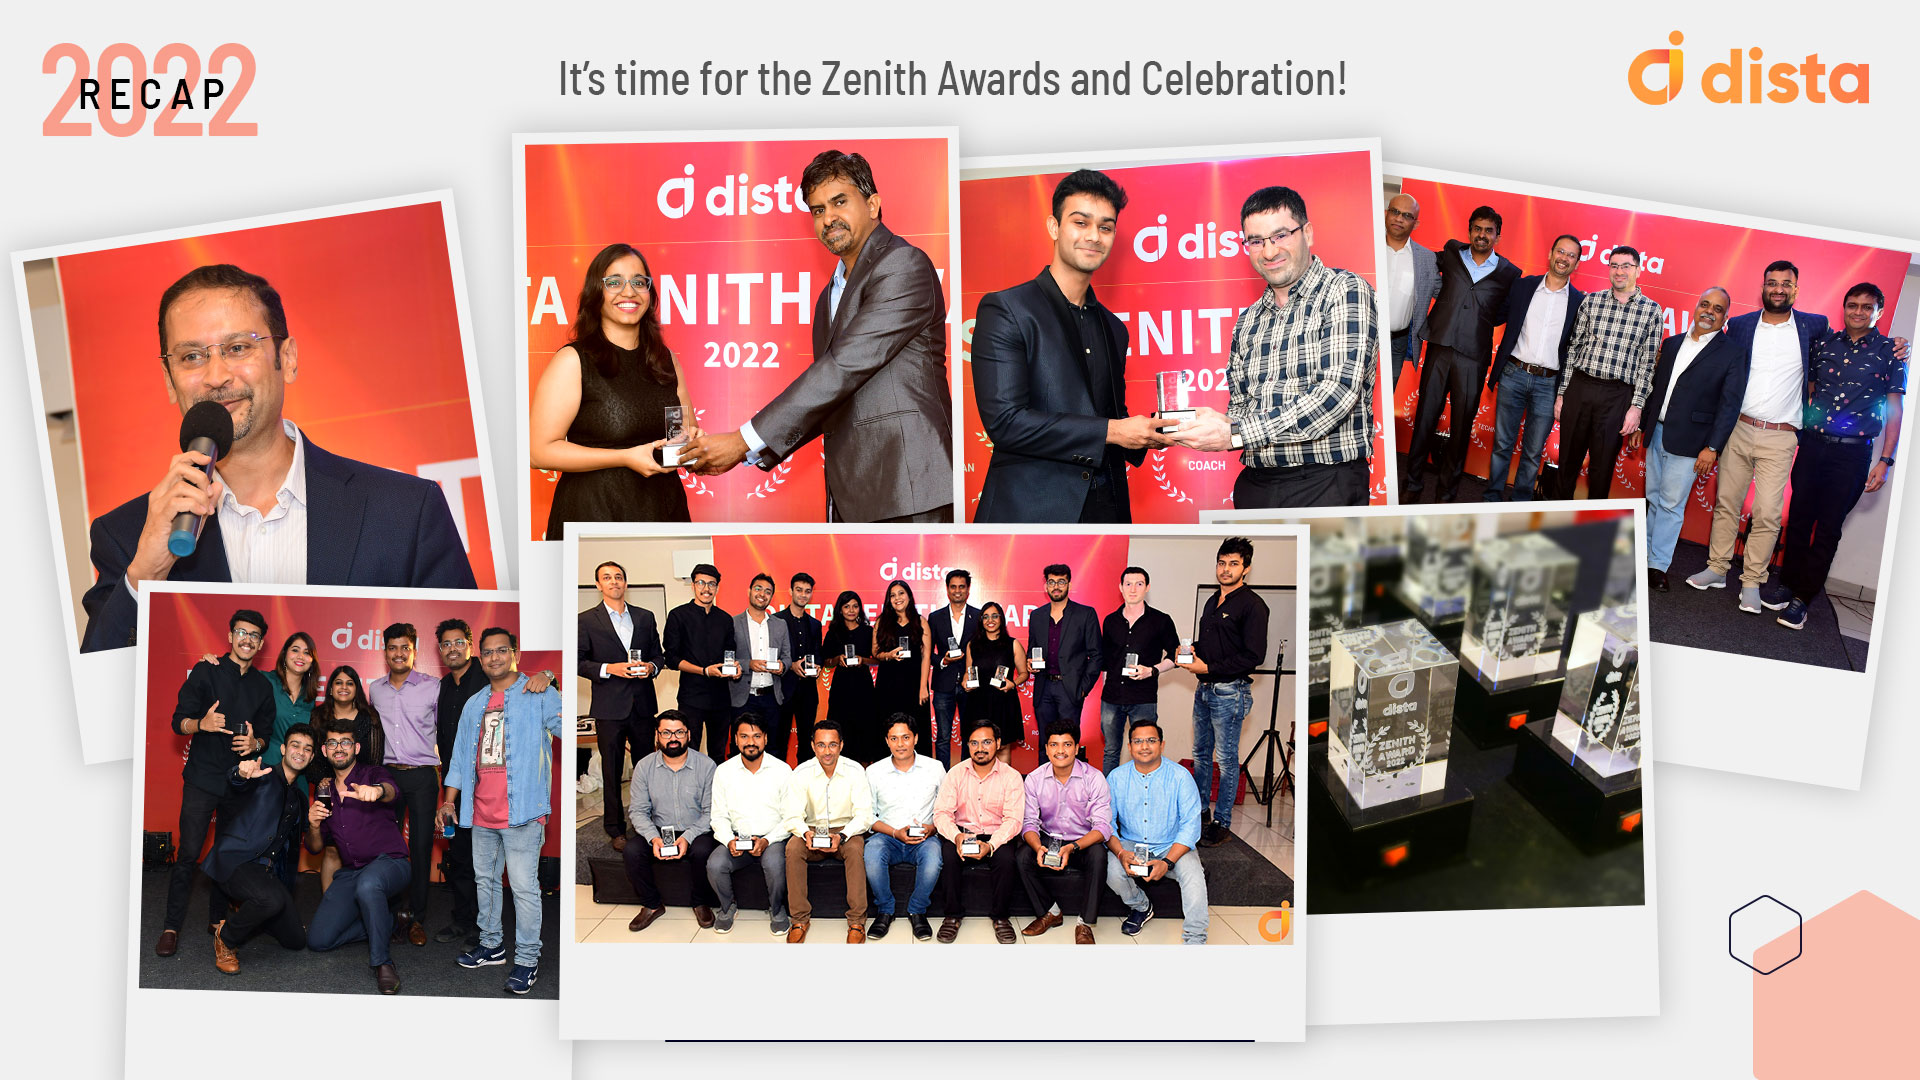 It’s time for the Zenith Awards and Celebration!